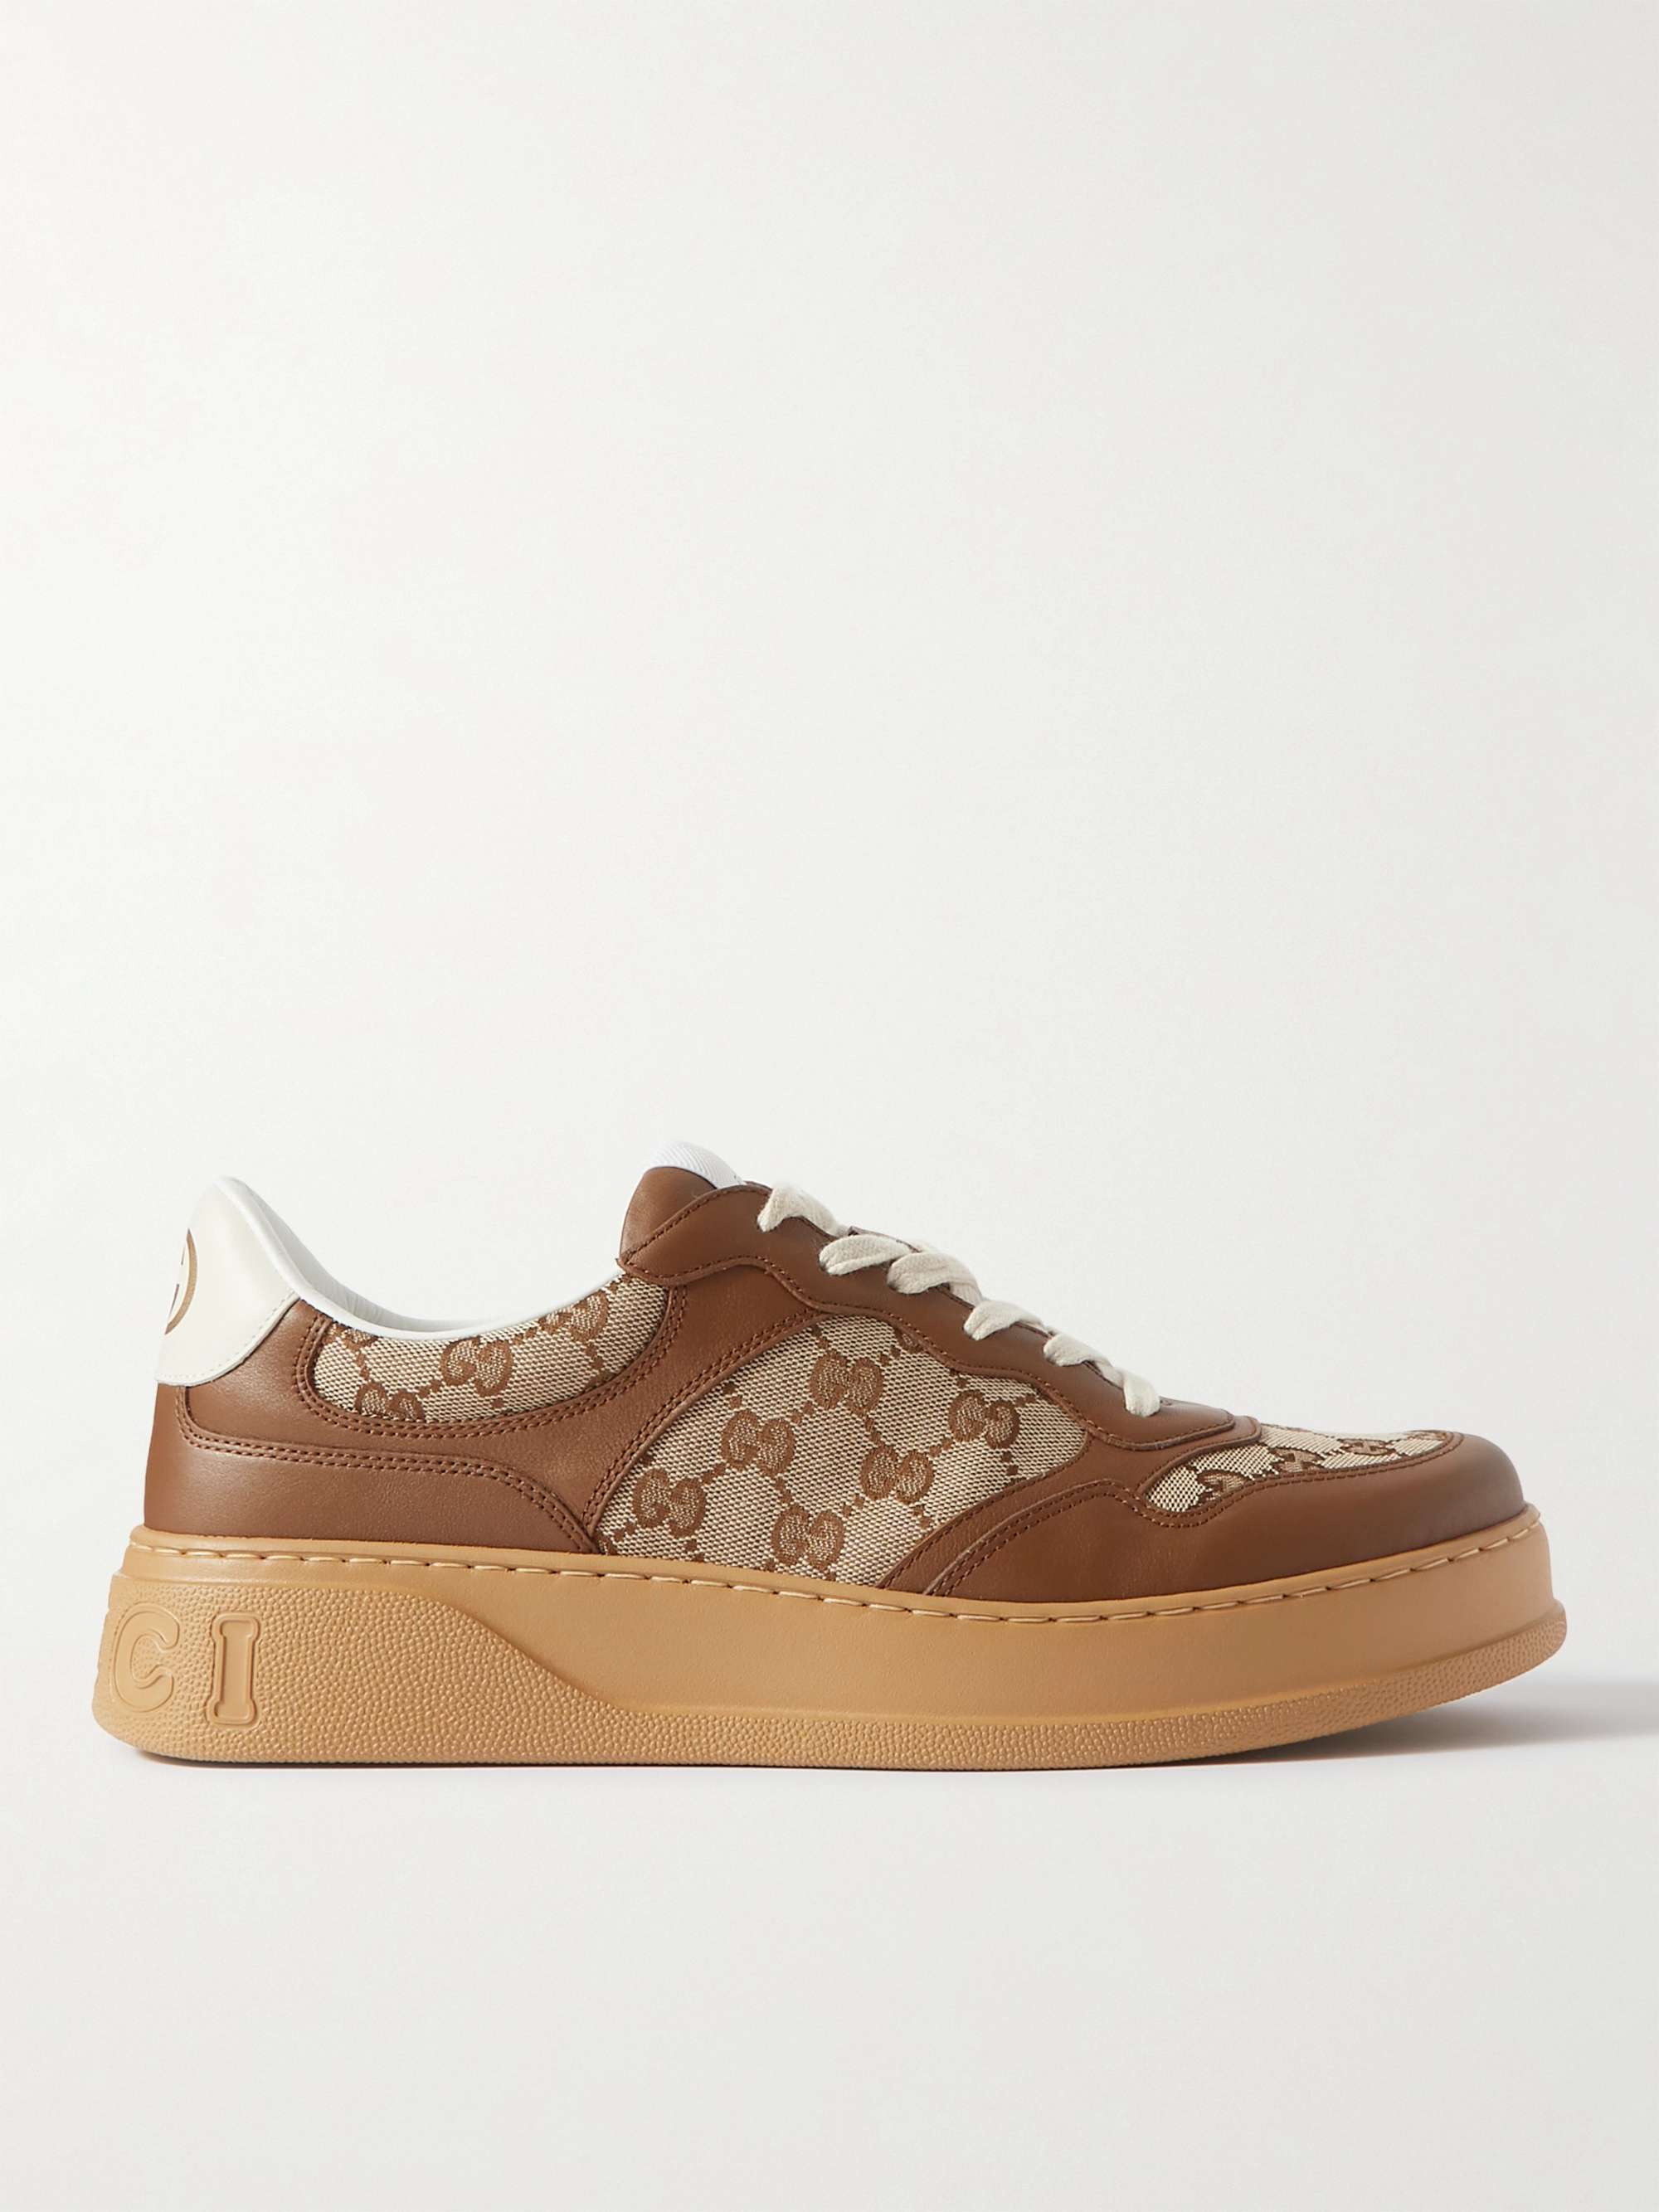 GUCCI Monogrammed Coated-Canvas and Leather Sneakers for Men